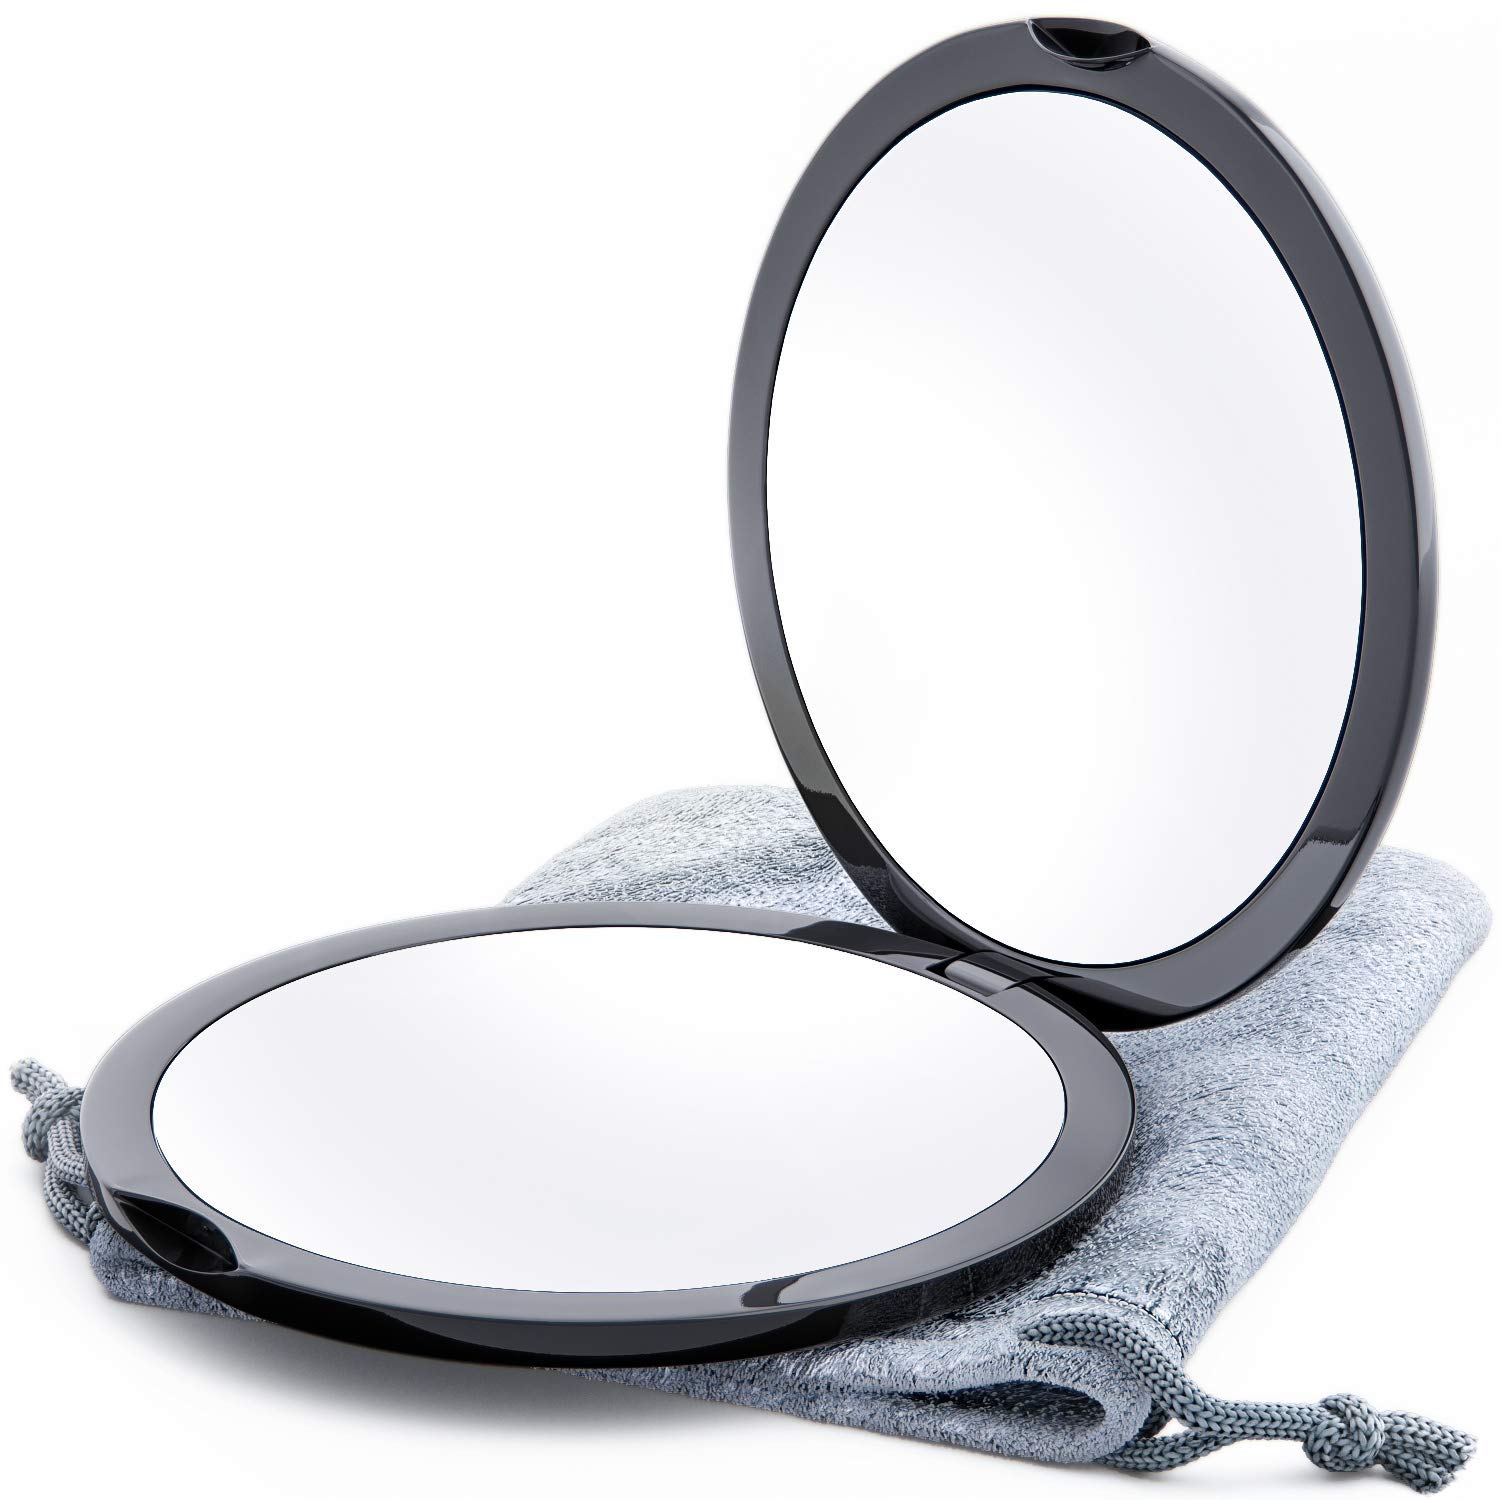 Amazon.com : Conair Pocket Mirror for Women or Men, Small Compact Mirror  for Purses or Toiletry Bags, Travel Magnifying Makeup Mirror with 1x/5x  Magnification in Black : Beauty & Personal Care